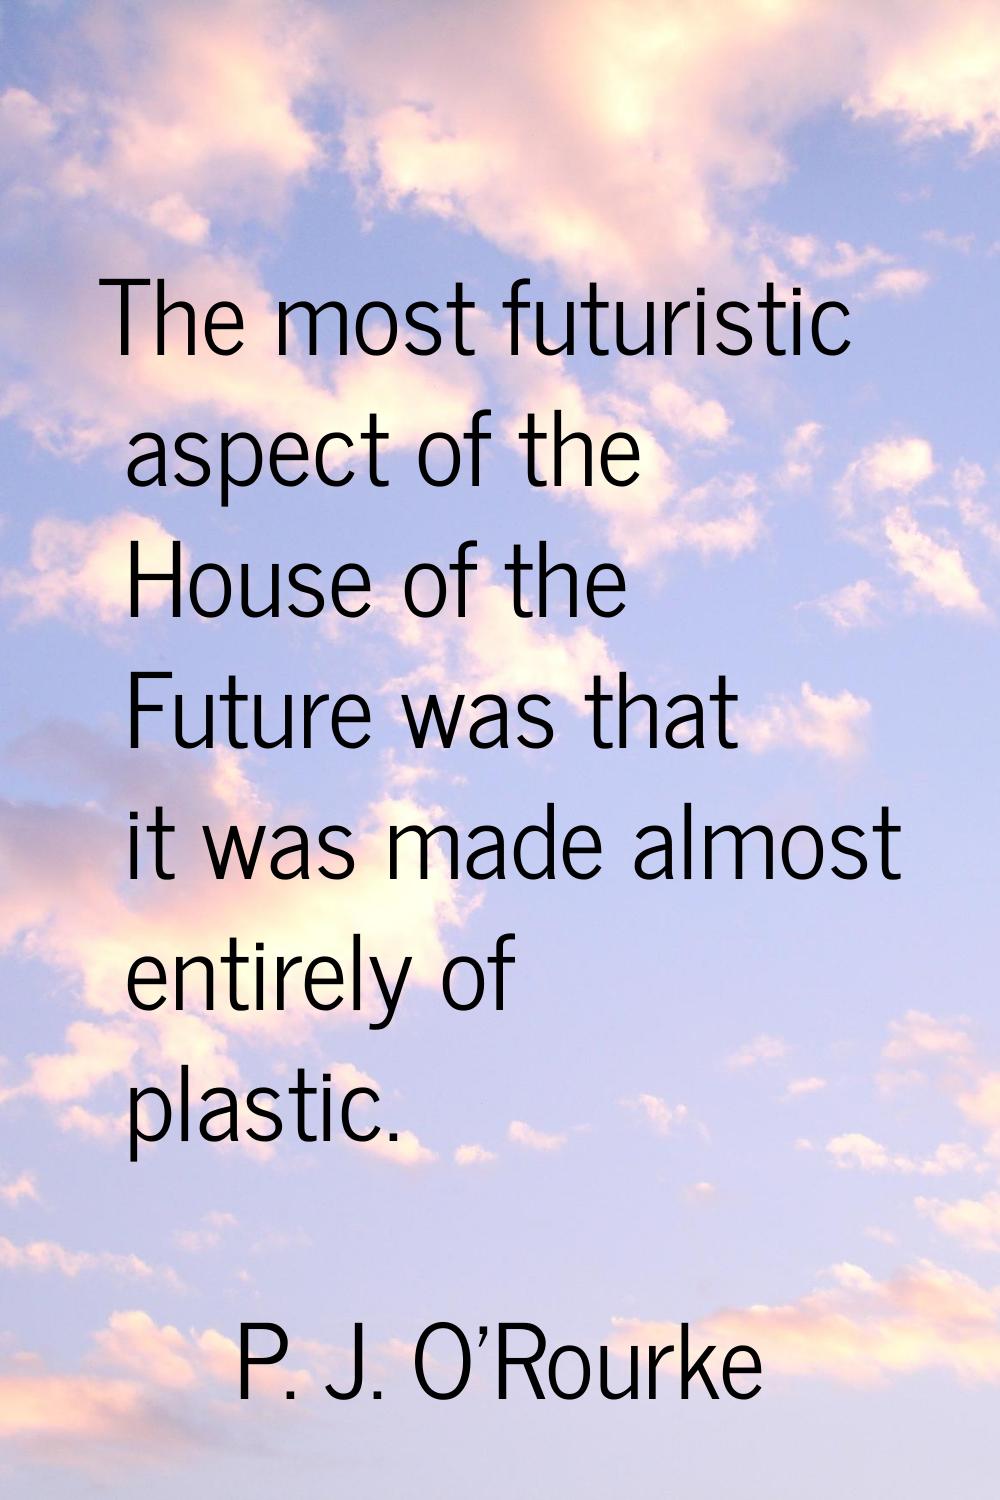 The most futuristic aspect of the House of the Future was that it was made almost entirely of plast